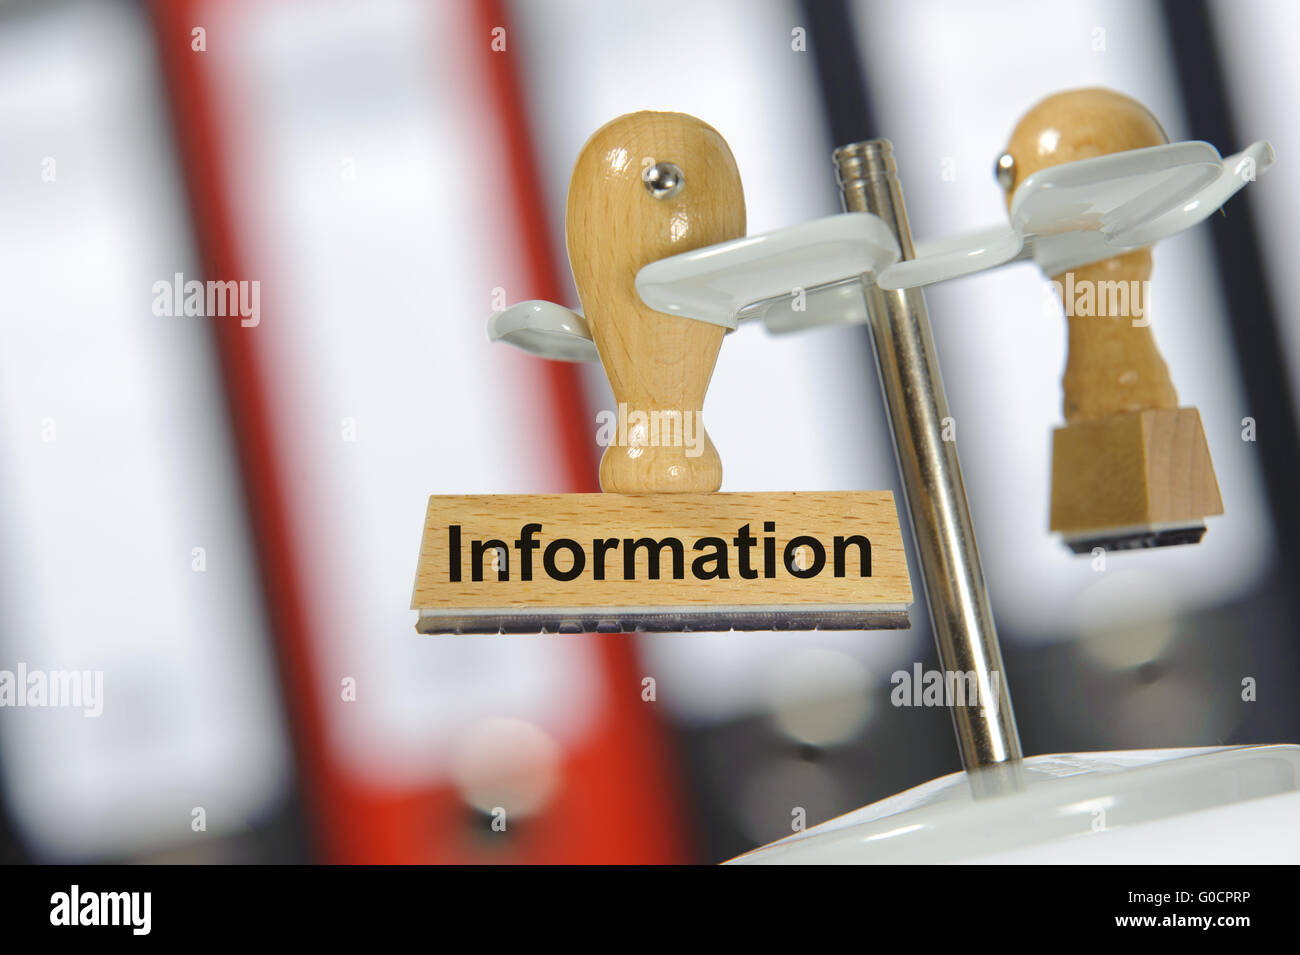 Information printed on rubber stamp Stock Photo